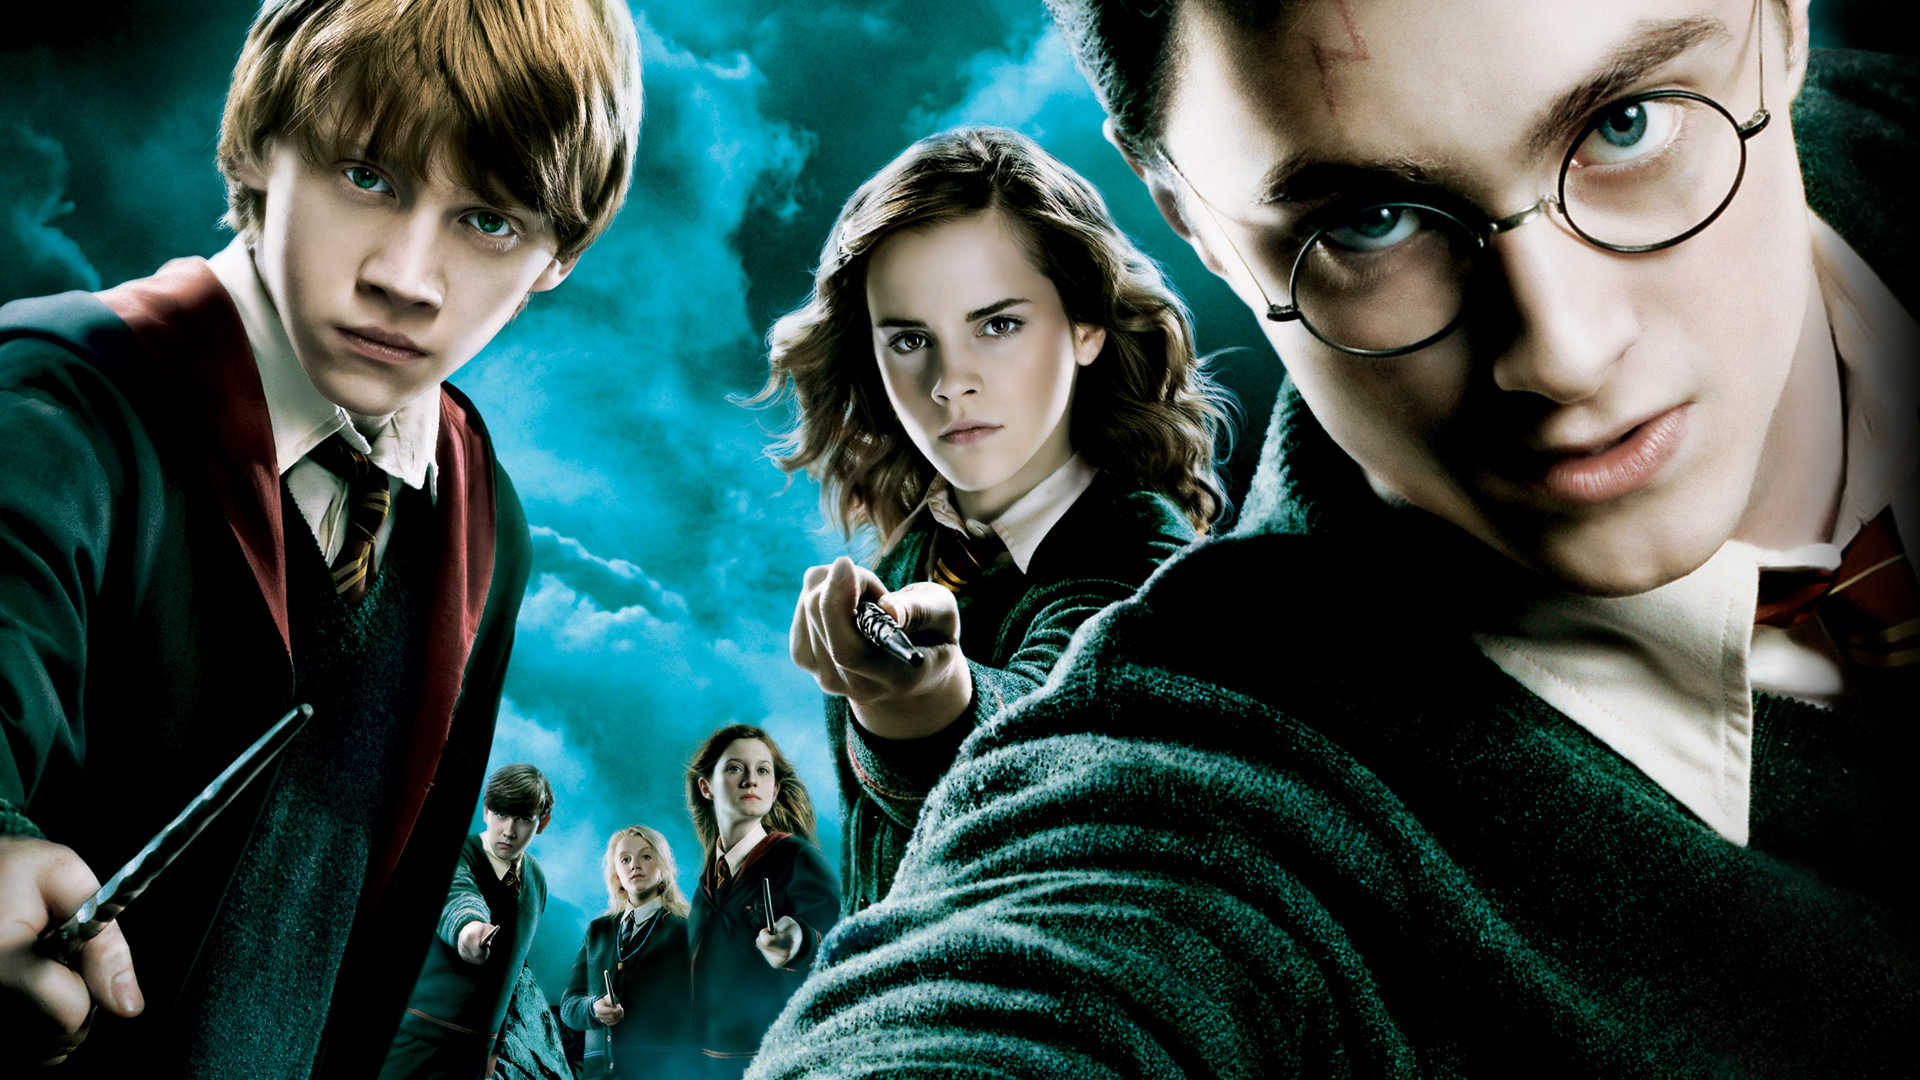 Harry Potter And The Chamber Of Secrets Wallpaper Widescreen with ...